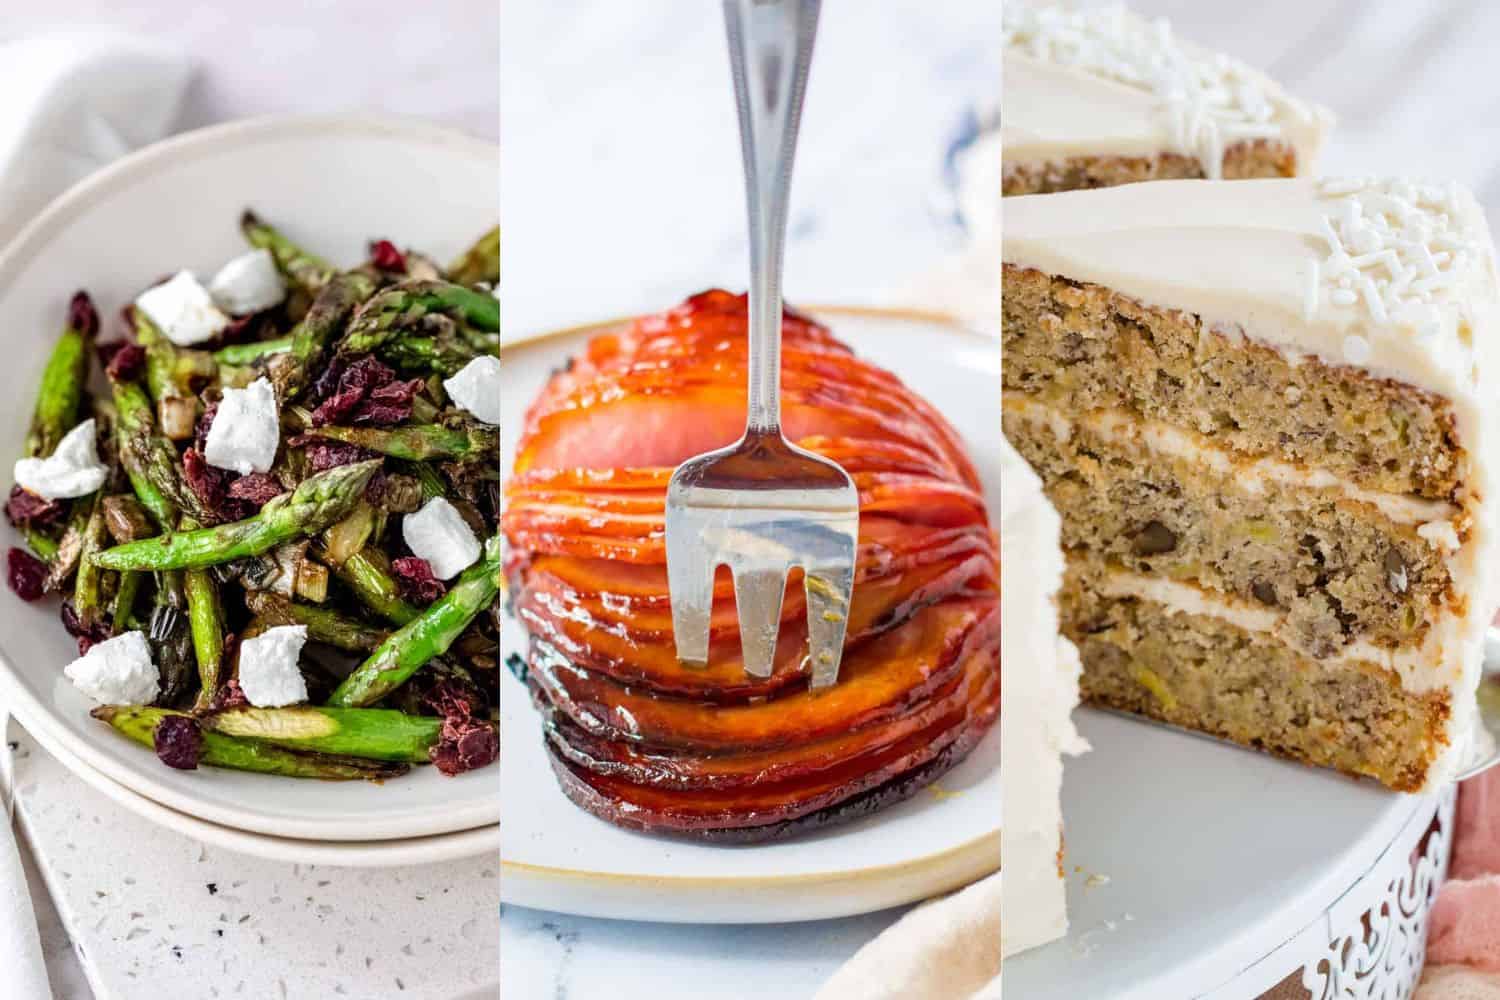 Gluten Free Recipes for Easter in a collage showing images of cake, vegetables, side dishes, and brunch recipes